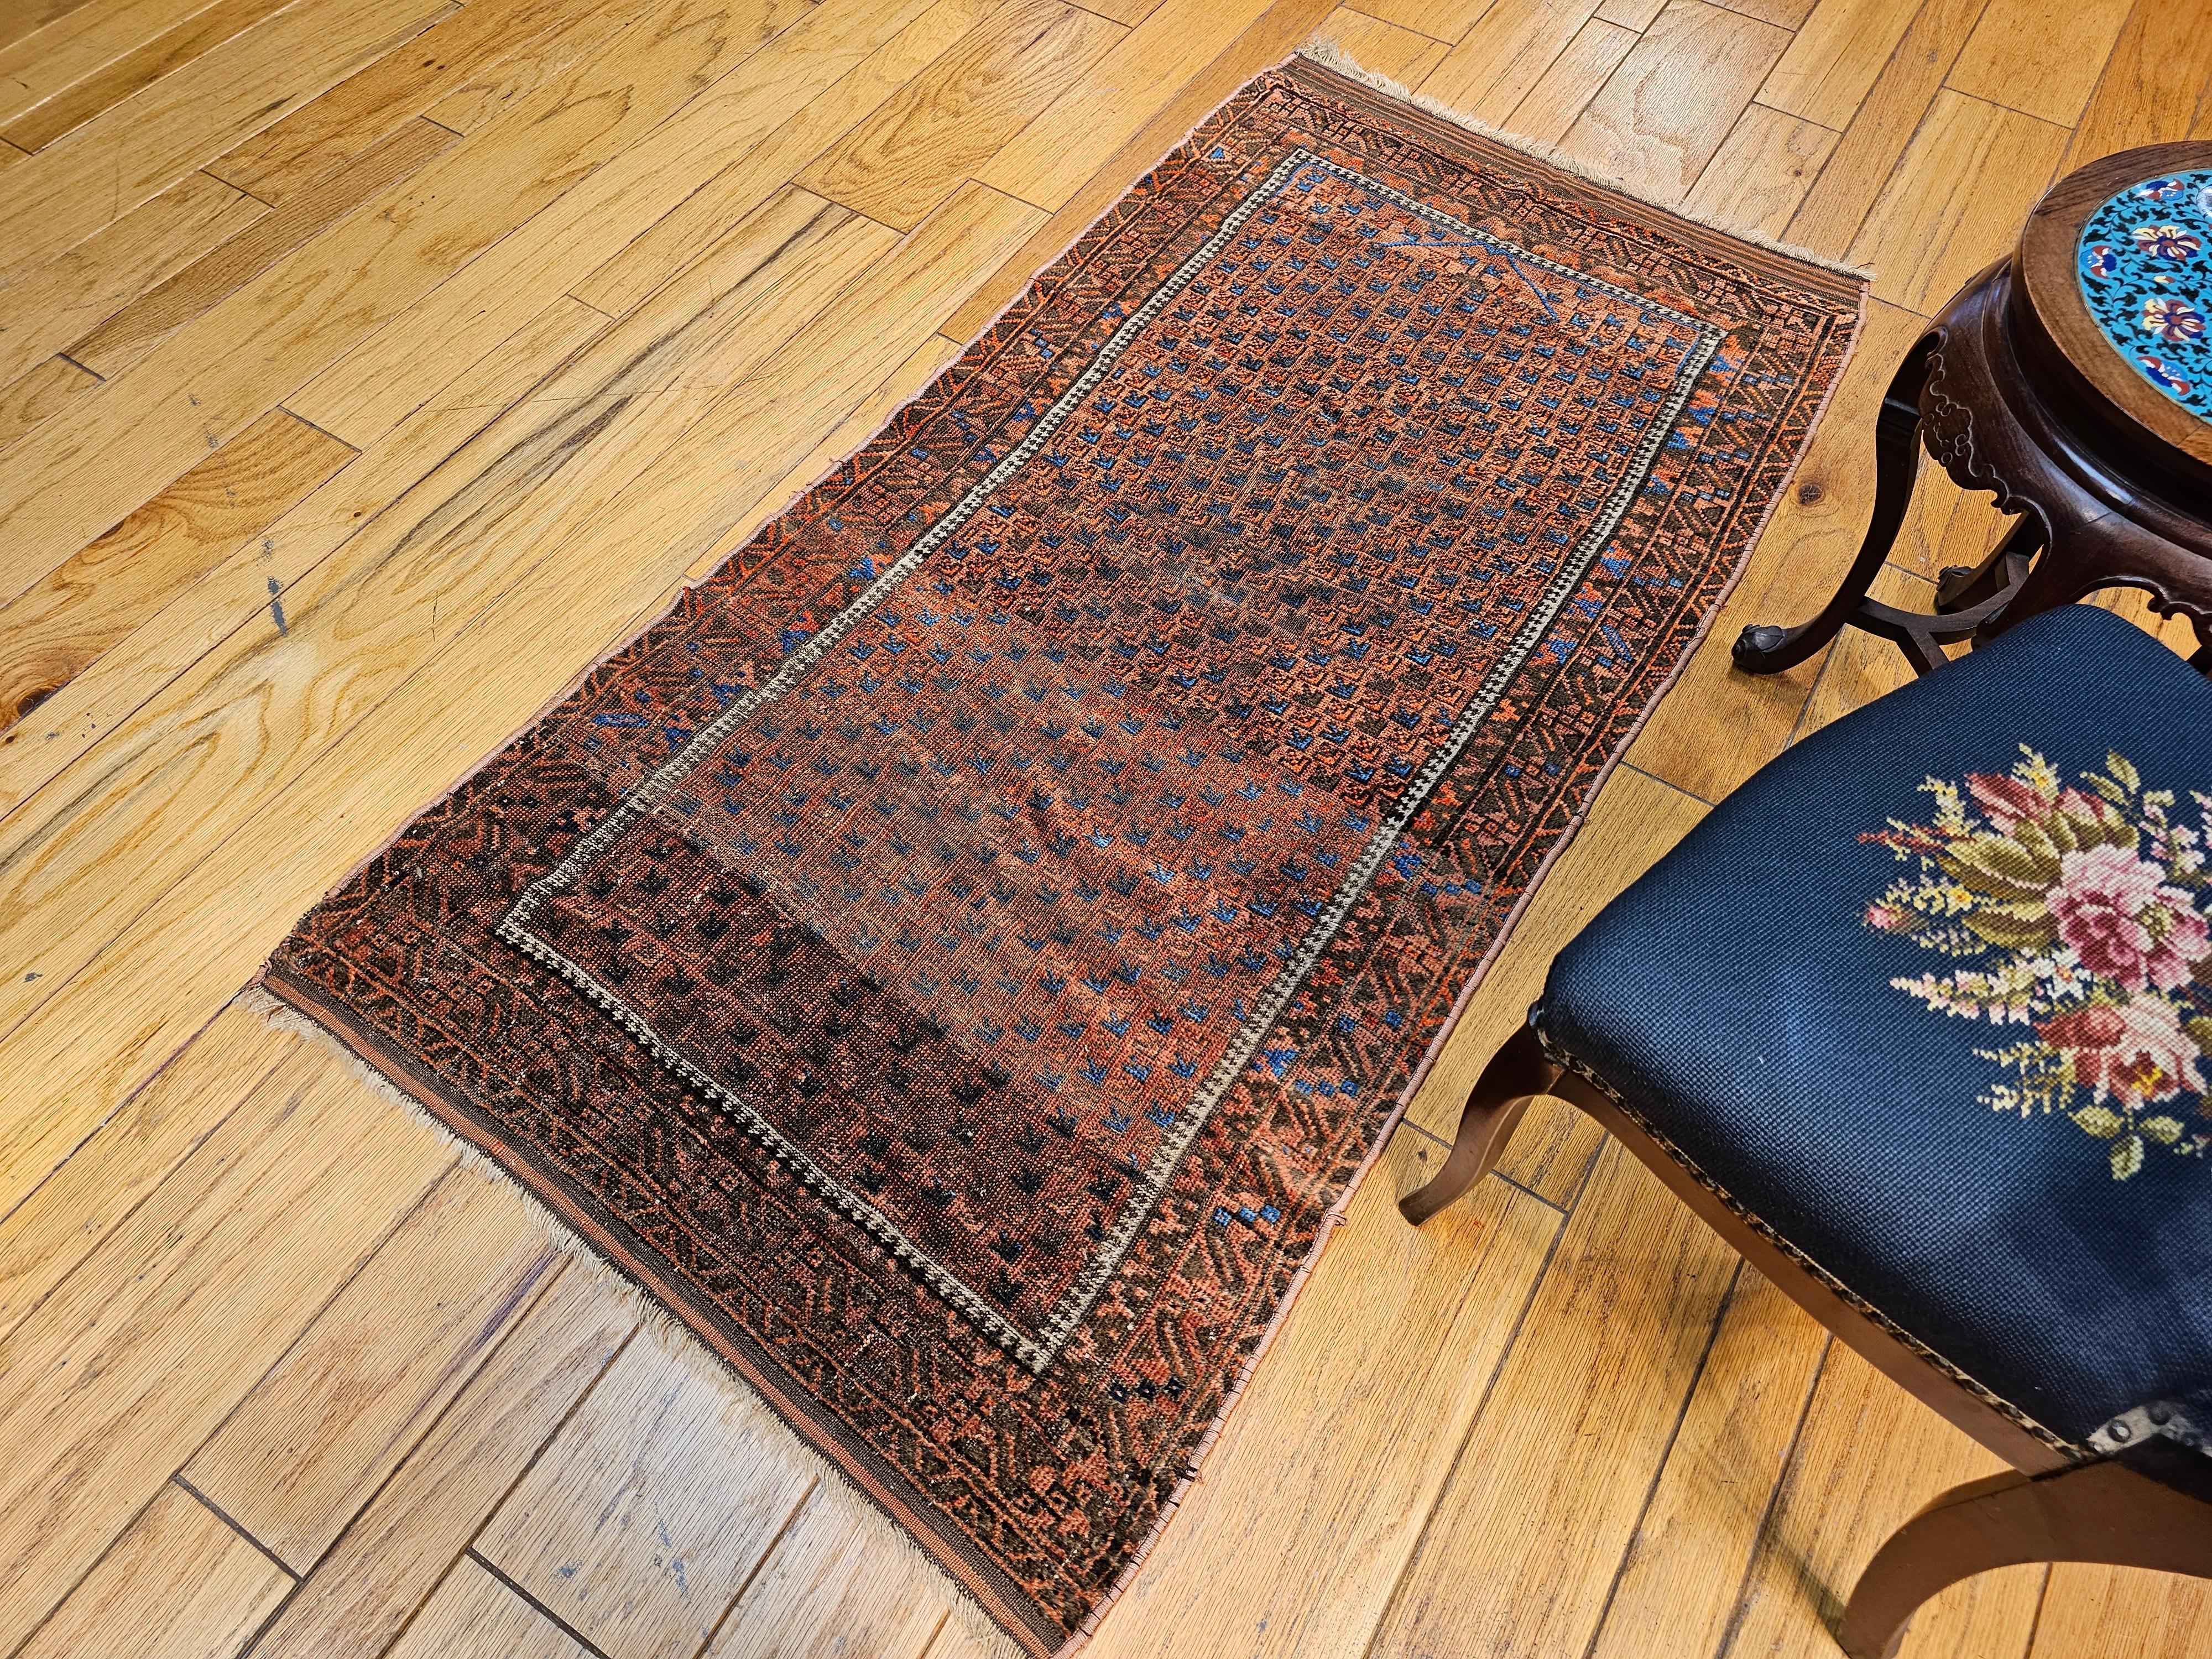 19th Century Turkmen Yomut Area Rug in Prayer Pattern in Dark Red, French Blue For Sale 7